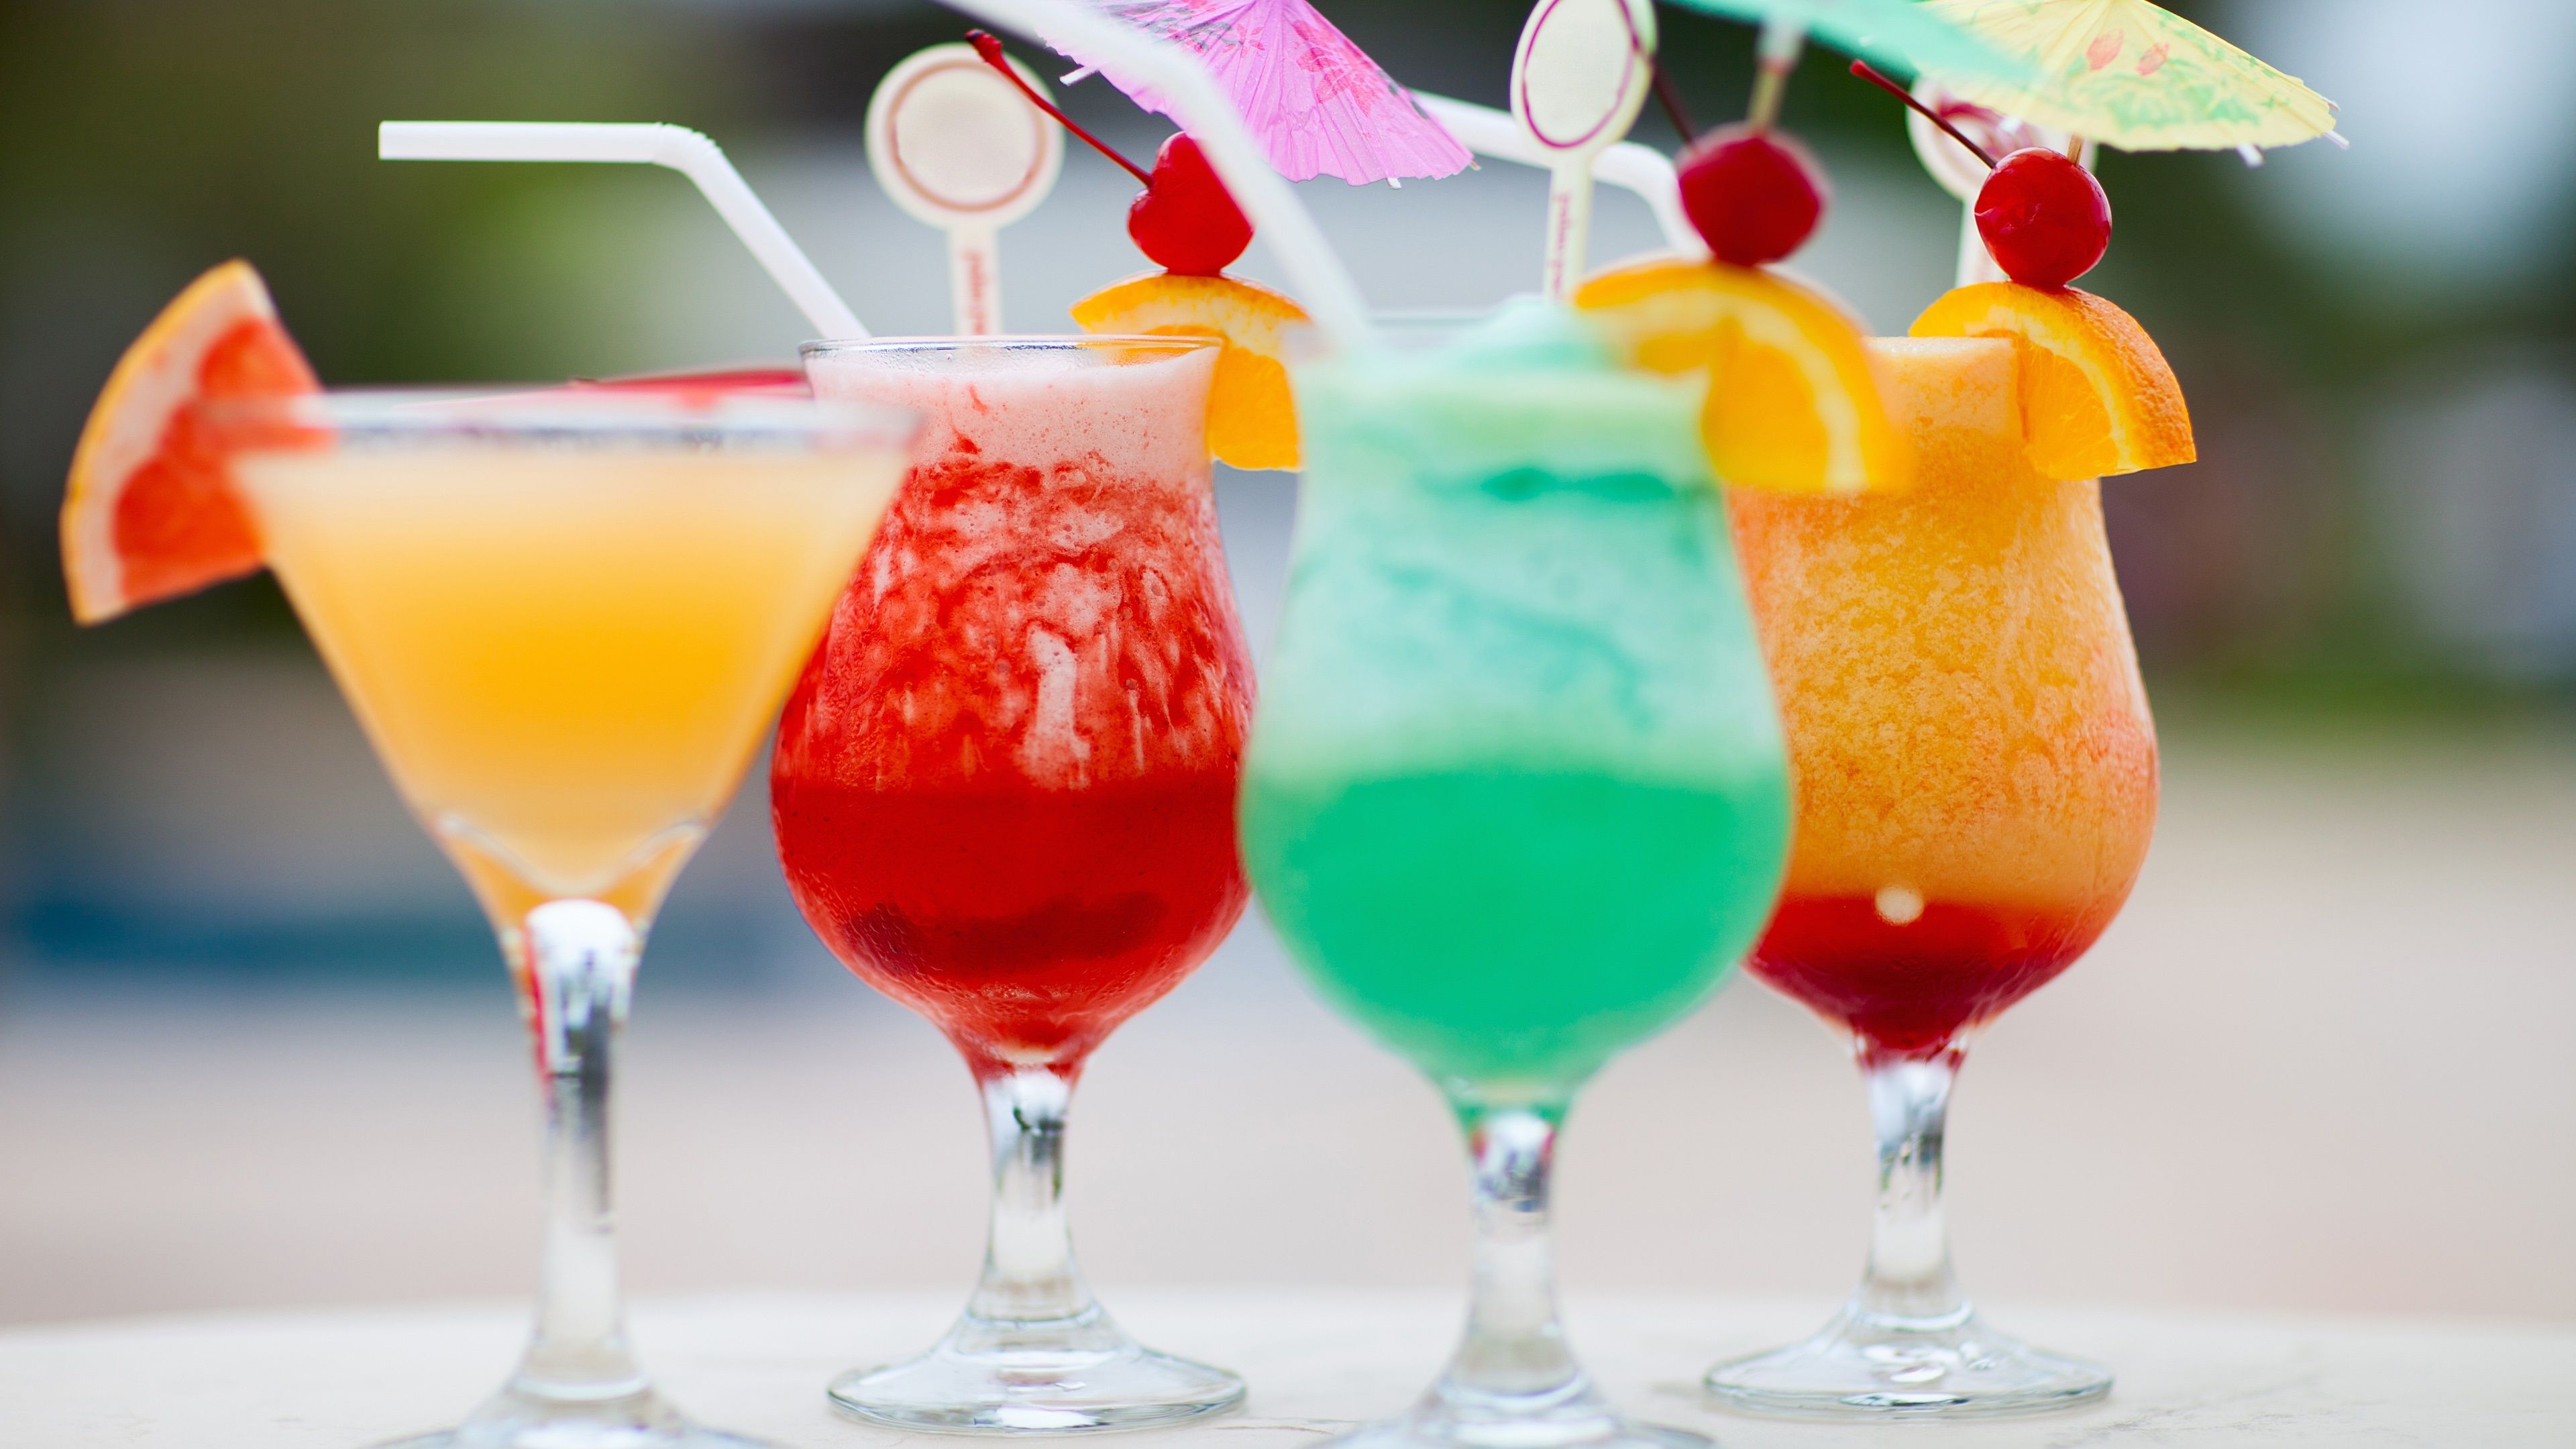 Wallpaper Fruit drinks, cocktail, cold, glass cups 3840x2160 UHD 4K Picture, Image